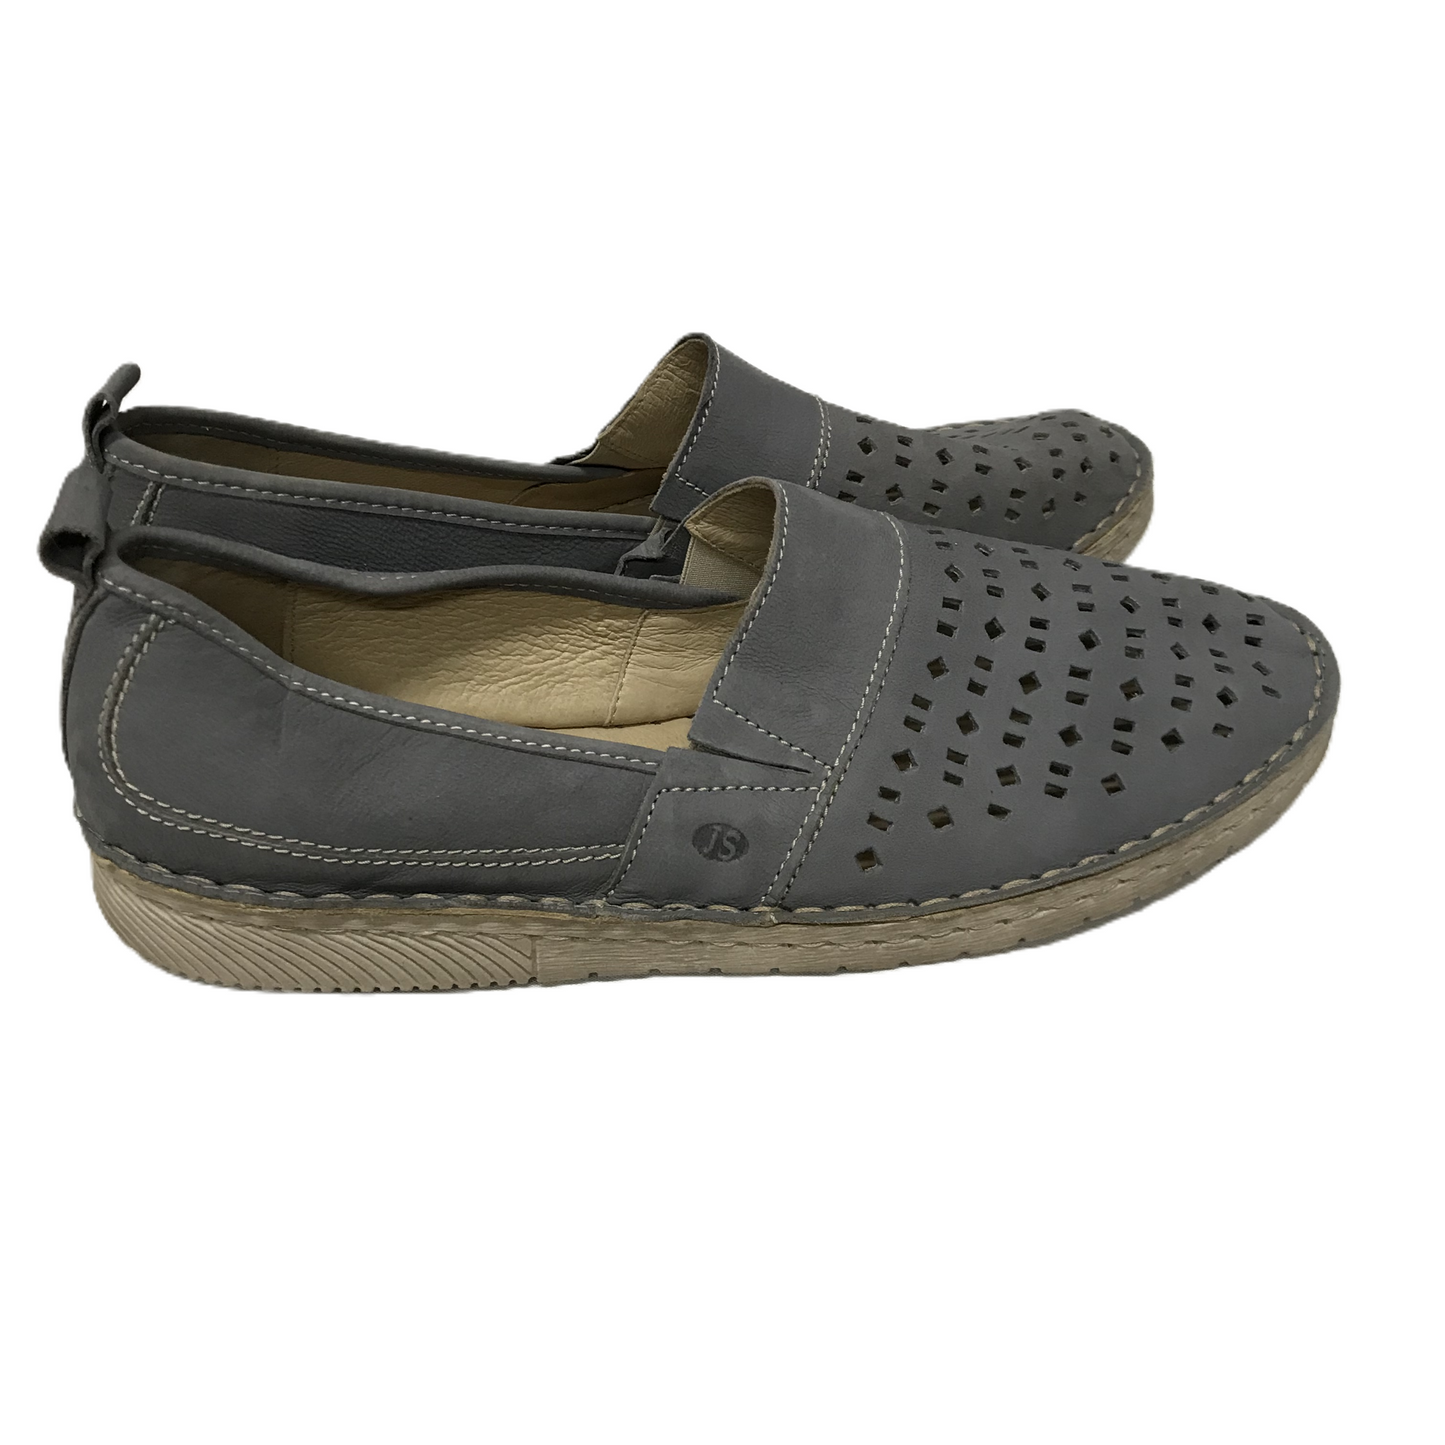 Grey Shoes Flats By Josef Seibel, Size: 10.5